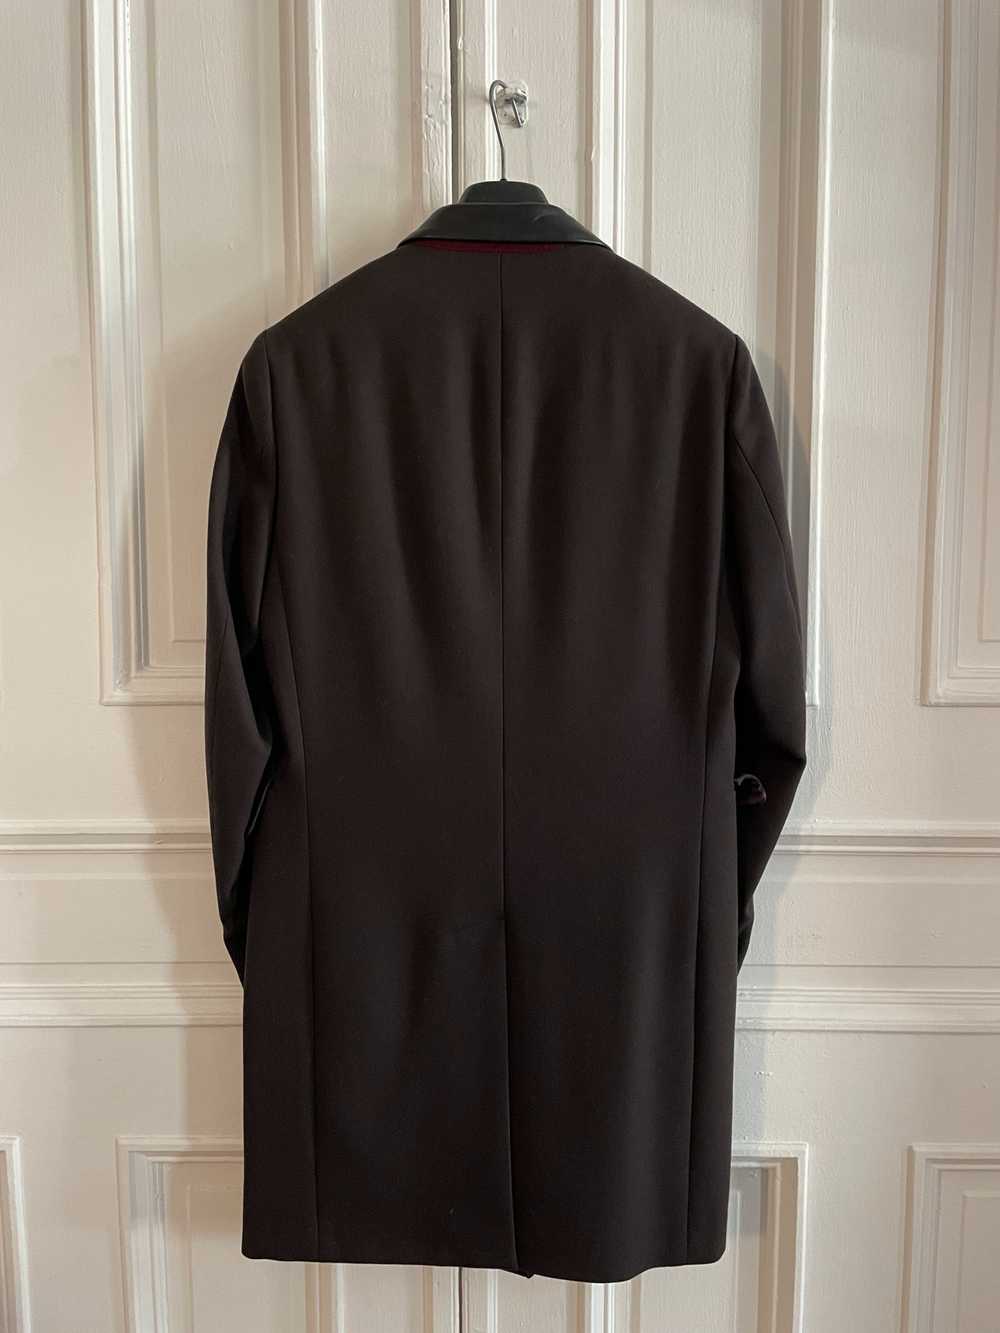 Paul Smith Wool Overcoat with Leather Collar - image 5